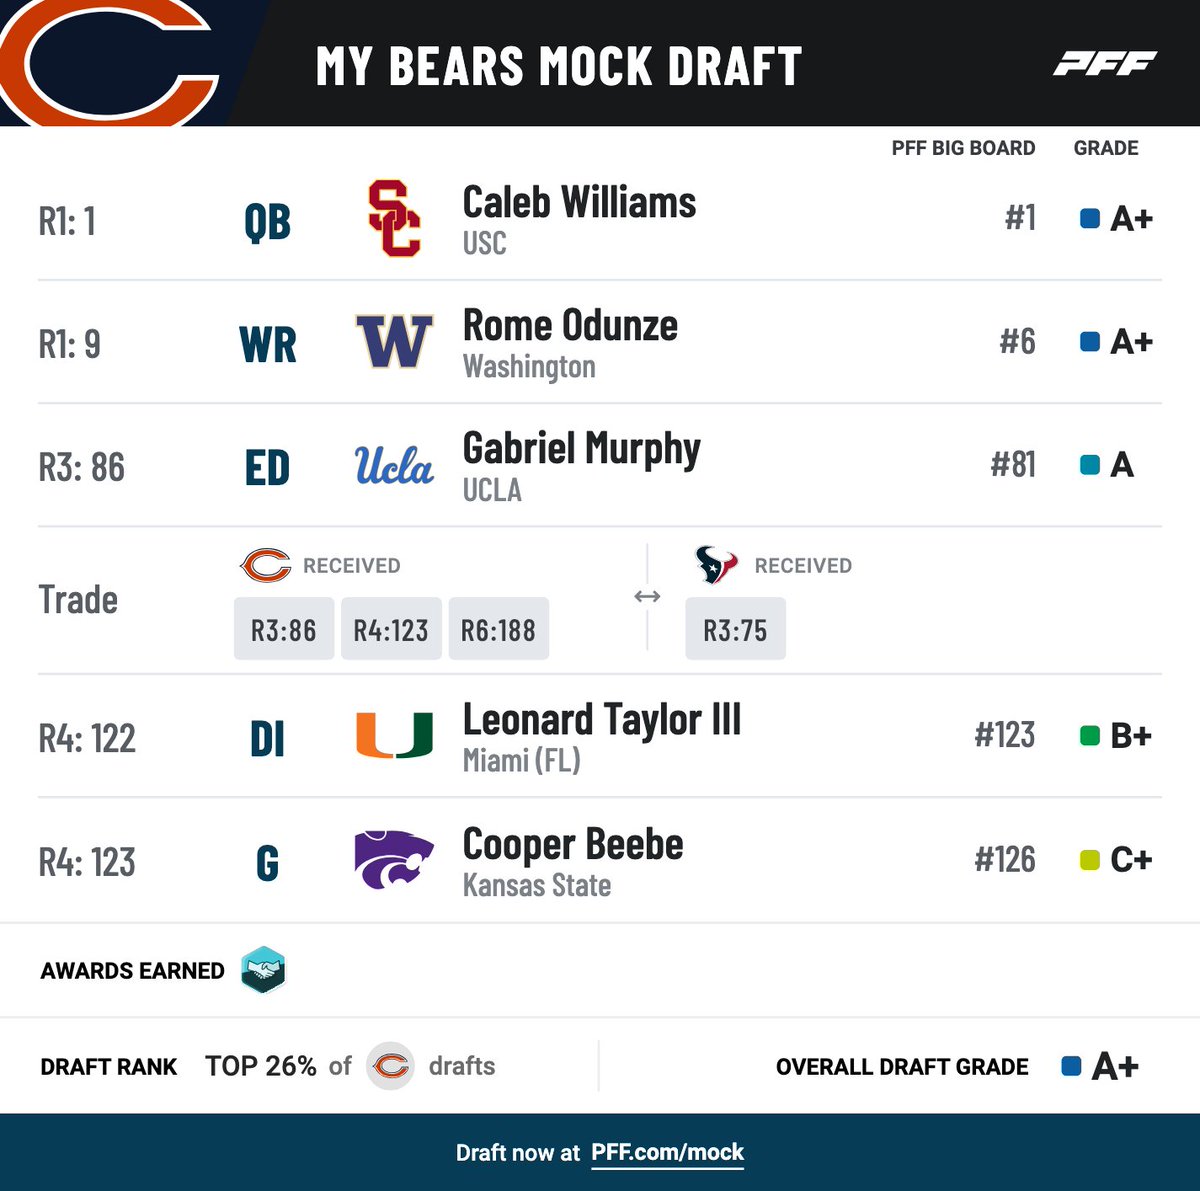 Acquire more picks without giving up 9? 🤝 pff.com/mock